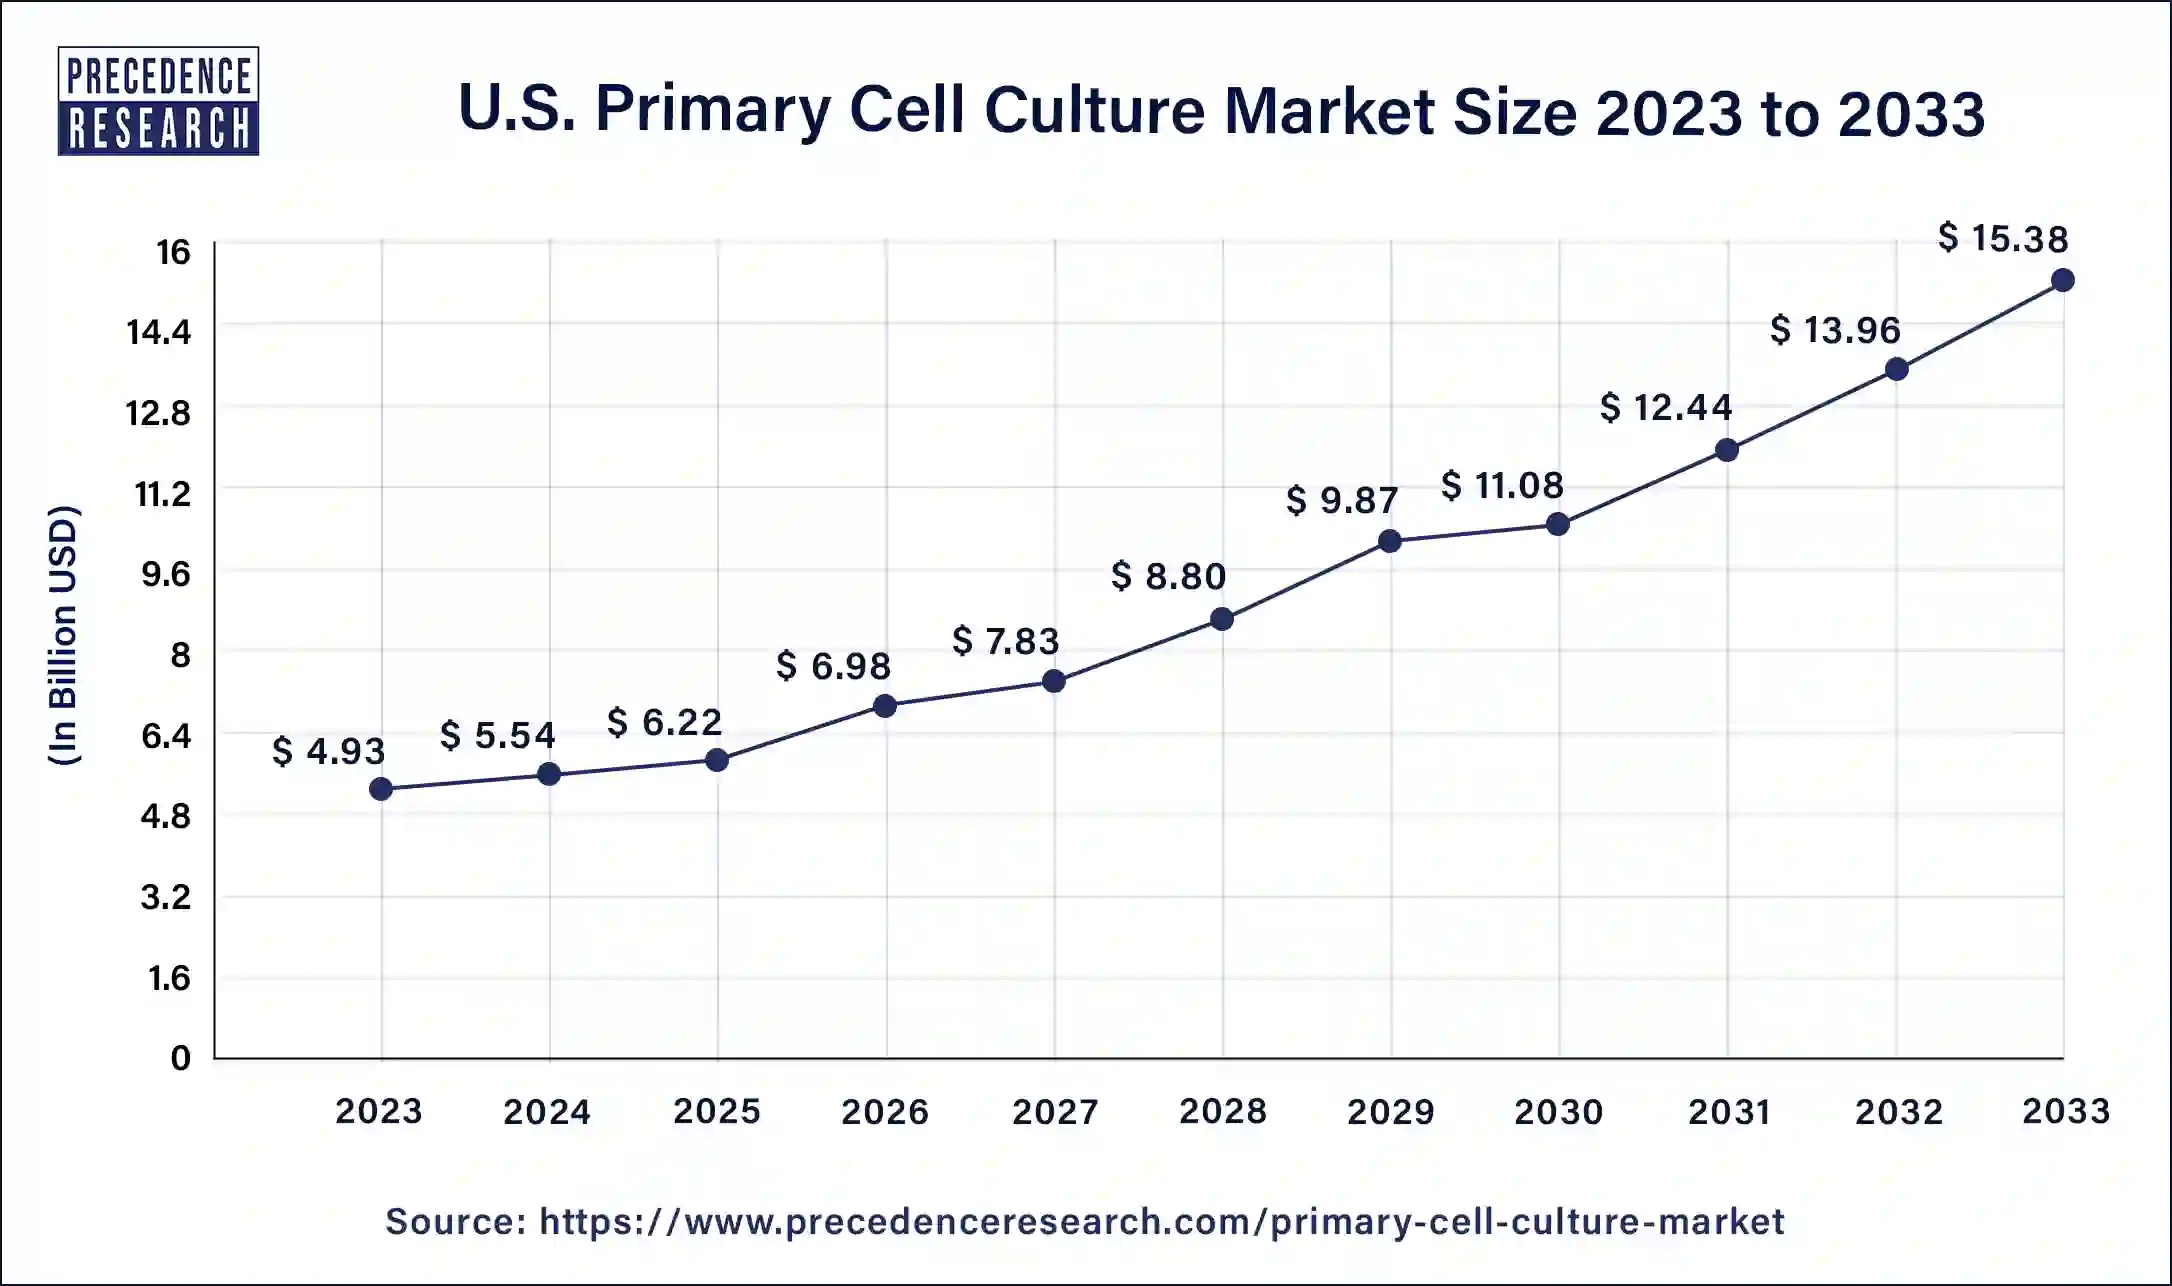 U.S. Primary Cell Culture Market Size 2024 to 2033